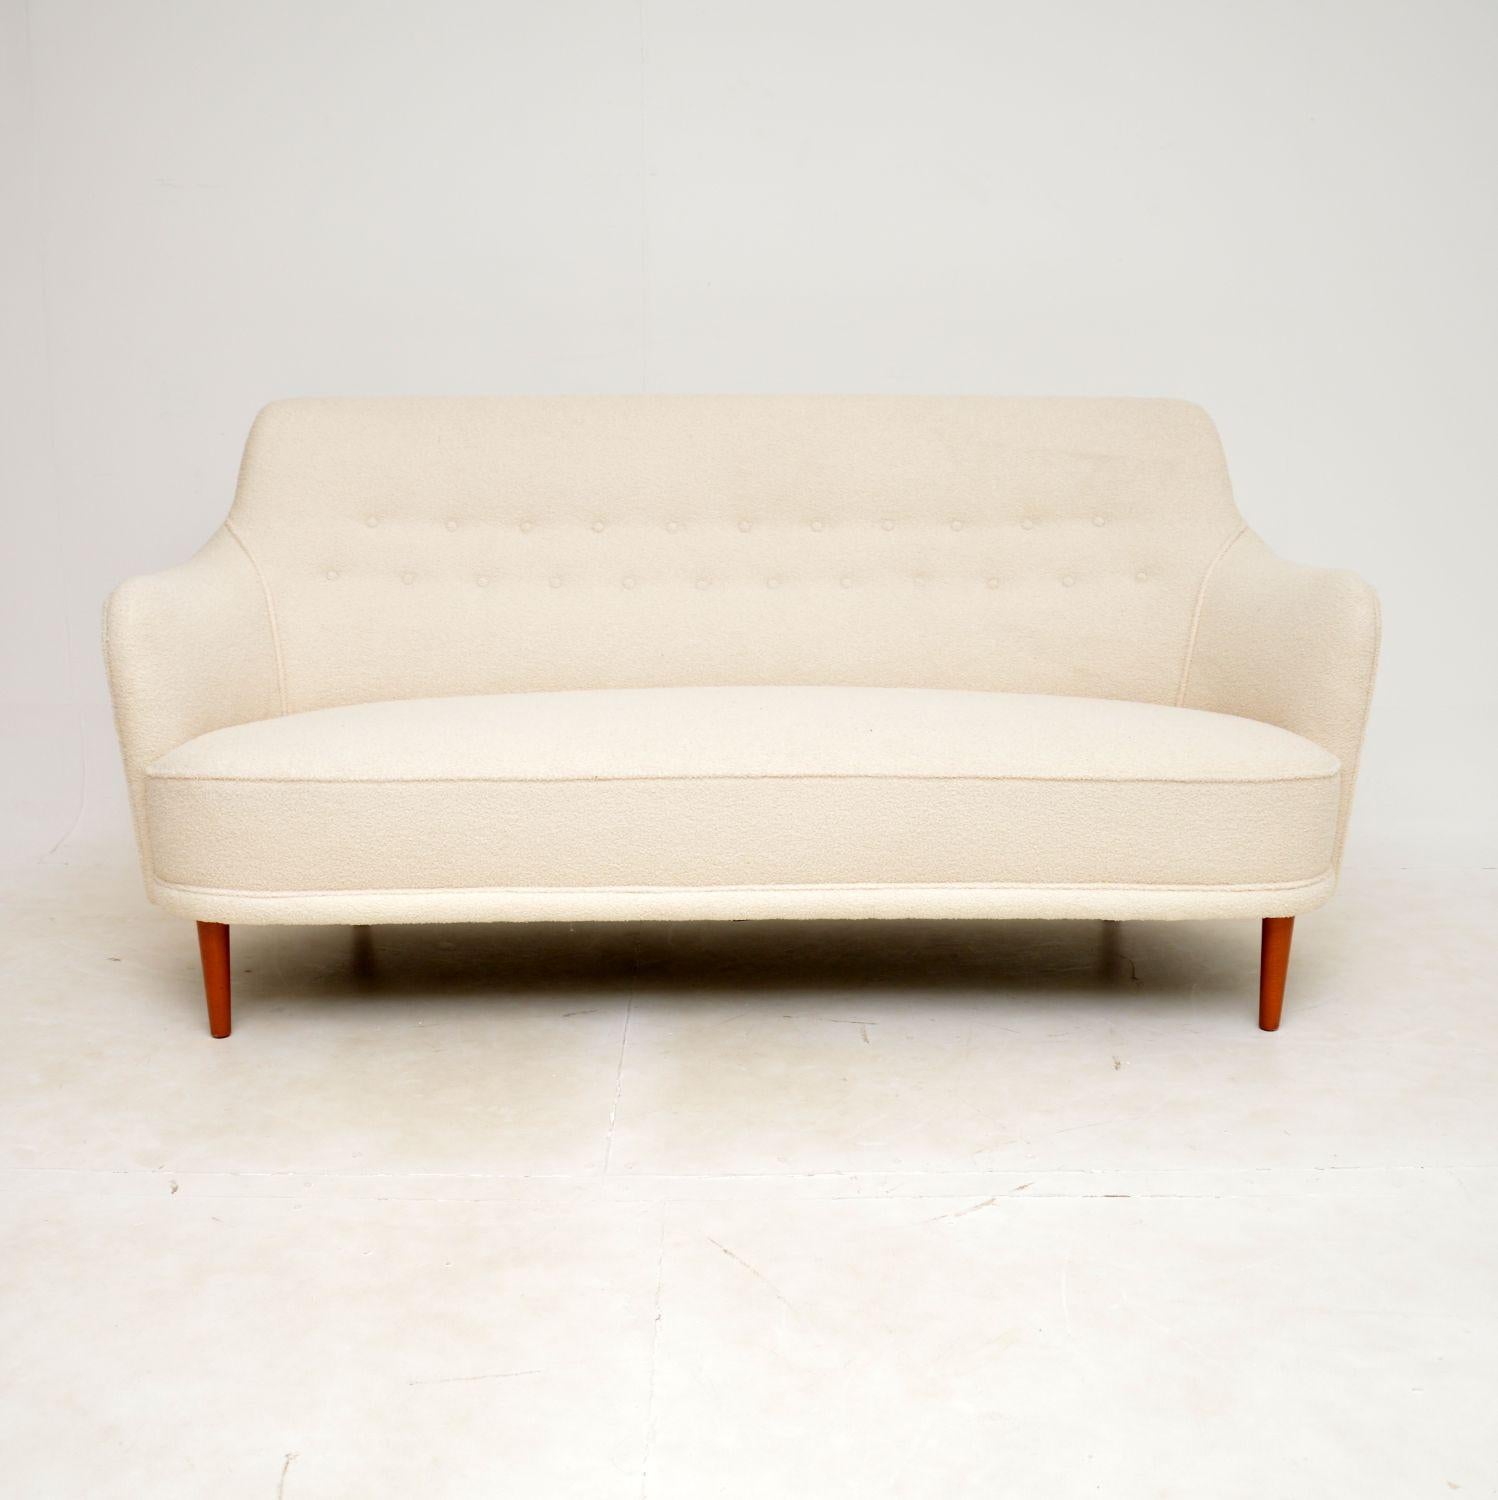 A stunning and extremely comfortable vintage Swedish sofa. This design is called the ‘Samsas’ sofa, it was designed by Carl Malmsten and dates from the 1960s.

This is of extremely high quality, the well built frame looks amazing from all angles and